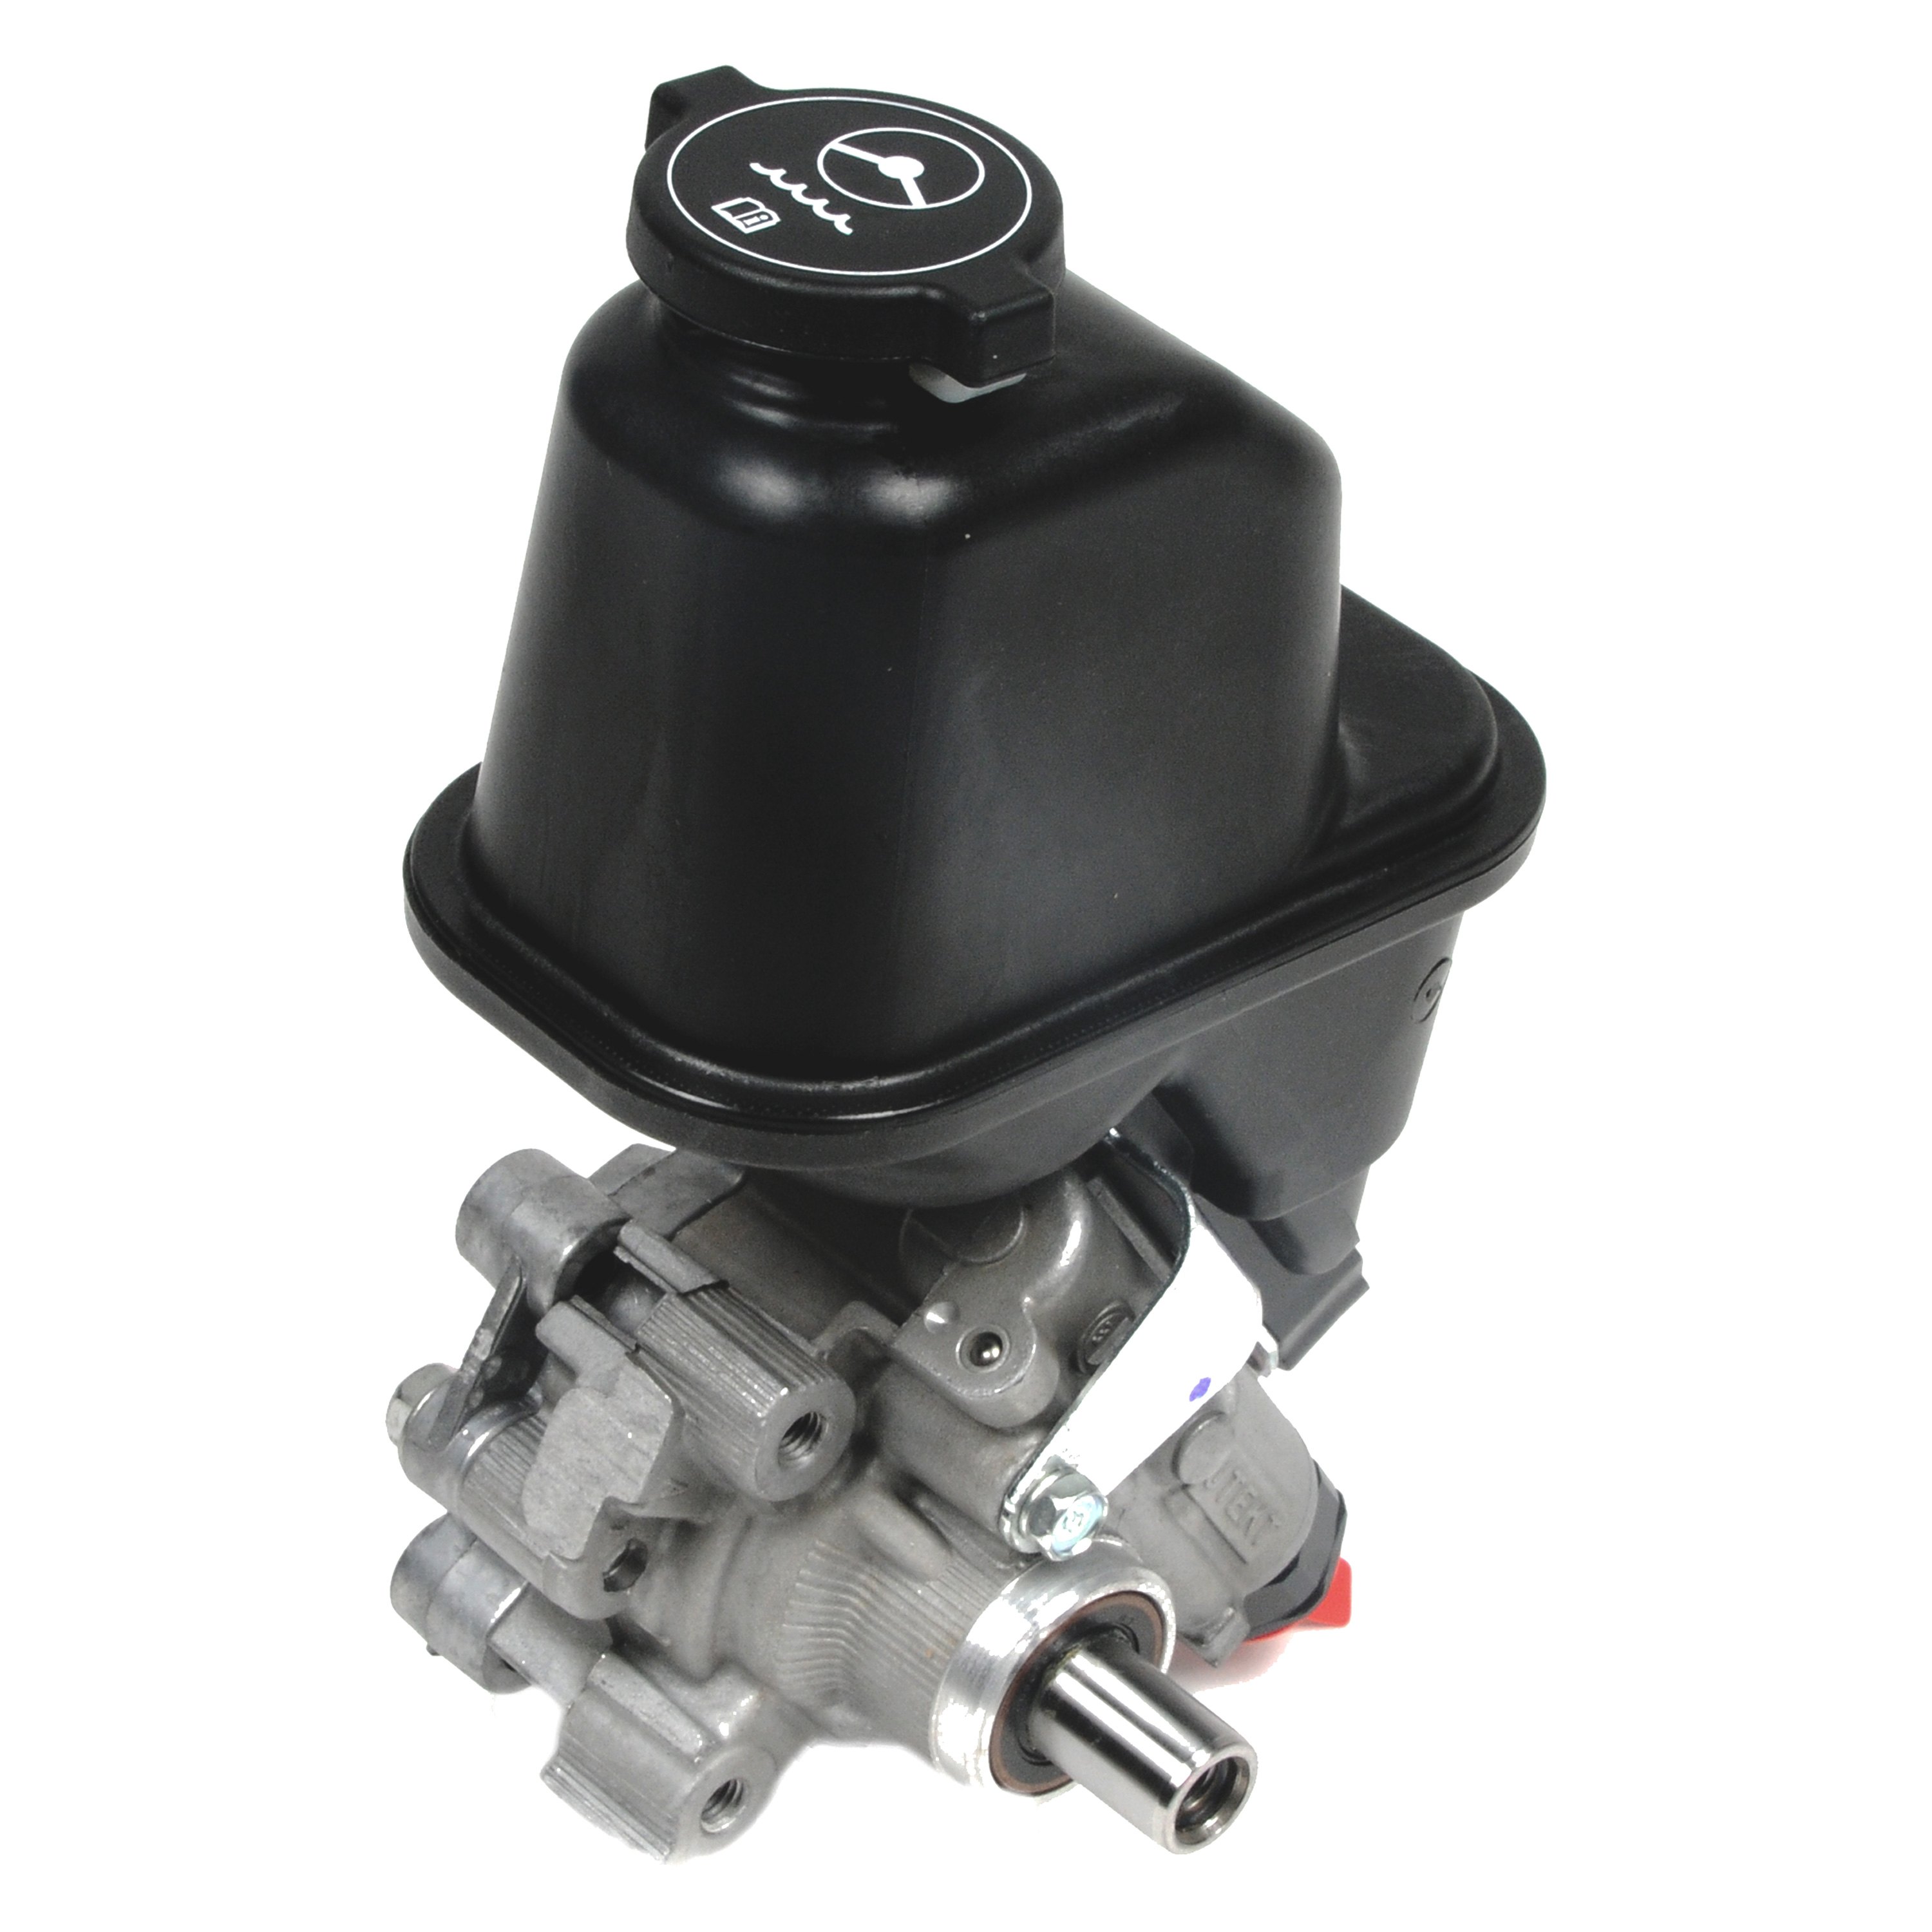 Remanufactured ACDelco 36P0412 Professional Power Steering Pump 